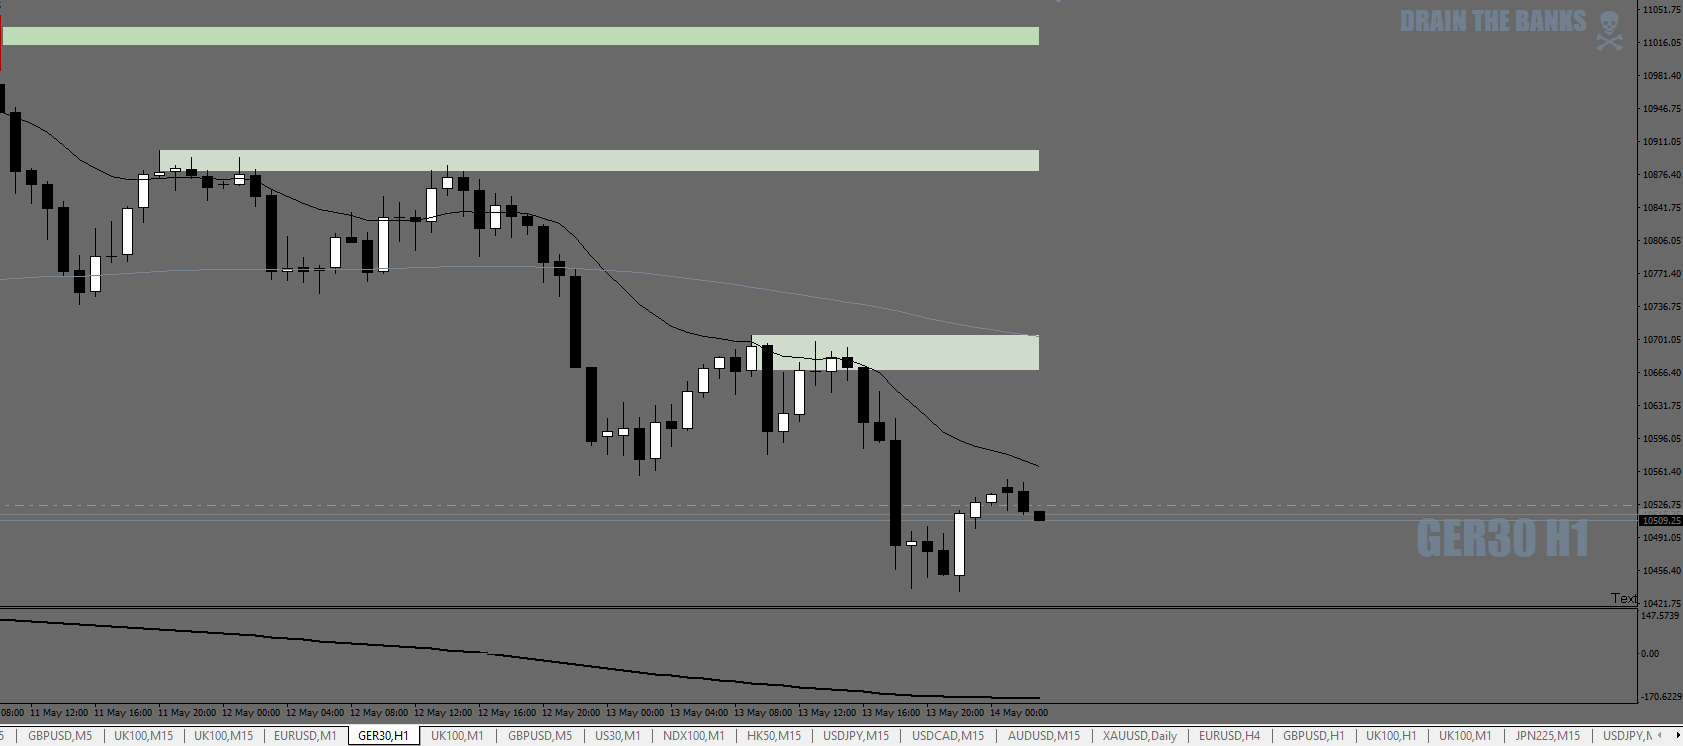 DAX-H1asMoveAtDayOpenFor+10-CROP-May13th-14th2020.png